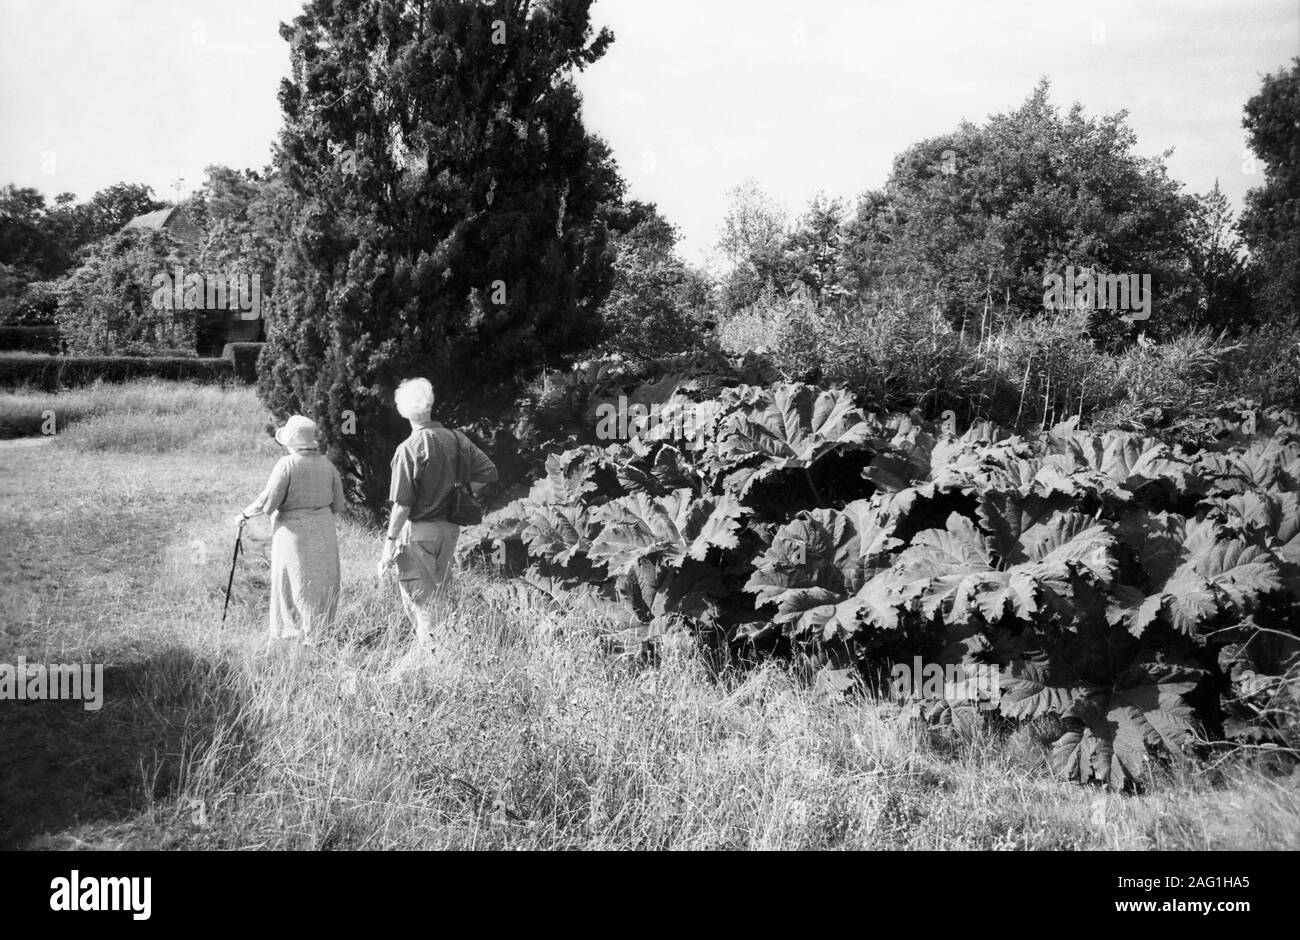 A couple enjoying a corner of Christopher Lloyd's garden at Great Dixter, Northiam, East Sussex, UK.  Black and white version Stock Photo